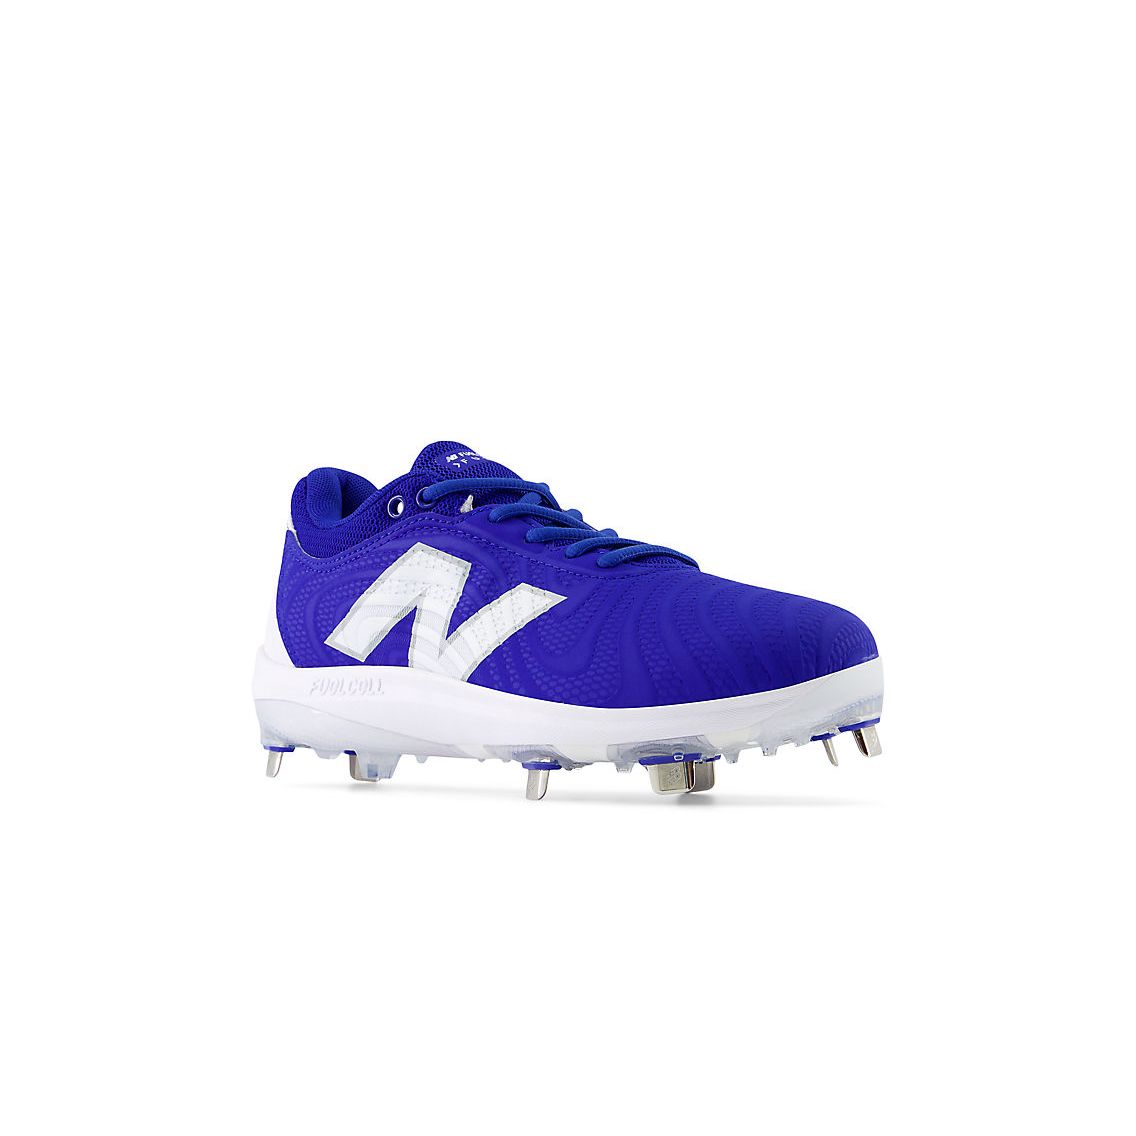 New Balance Women's FuelCell FUSE v4 Metal Fastpitch Softball Cleats - Team Royal / Optic White - SMFUSEB4